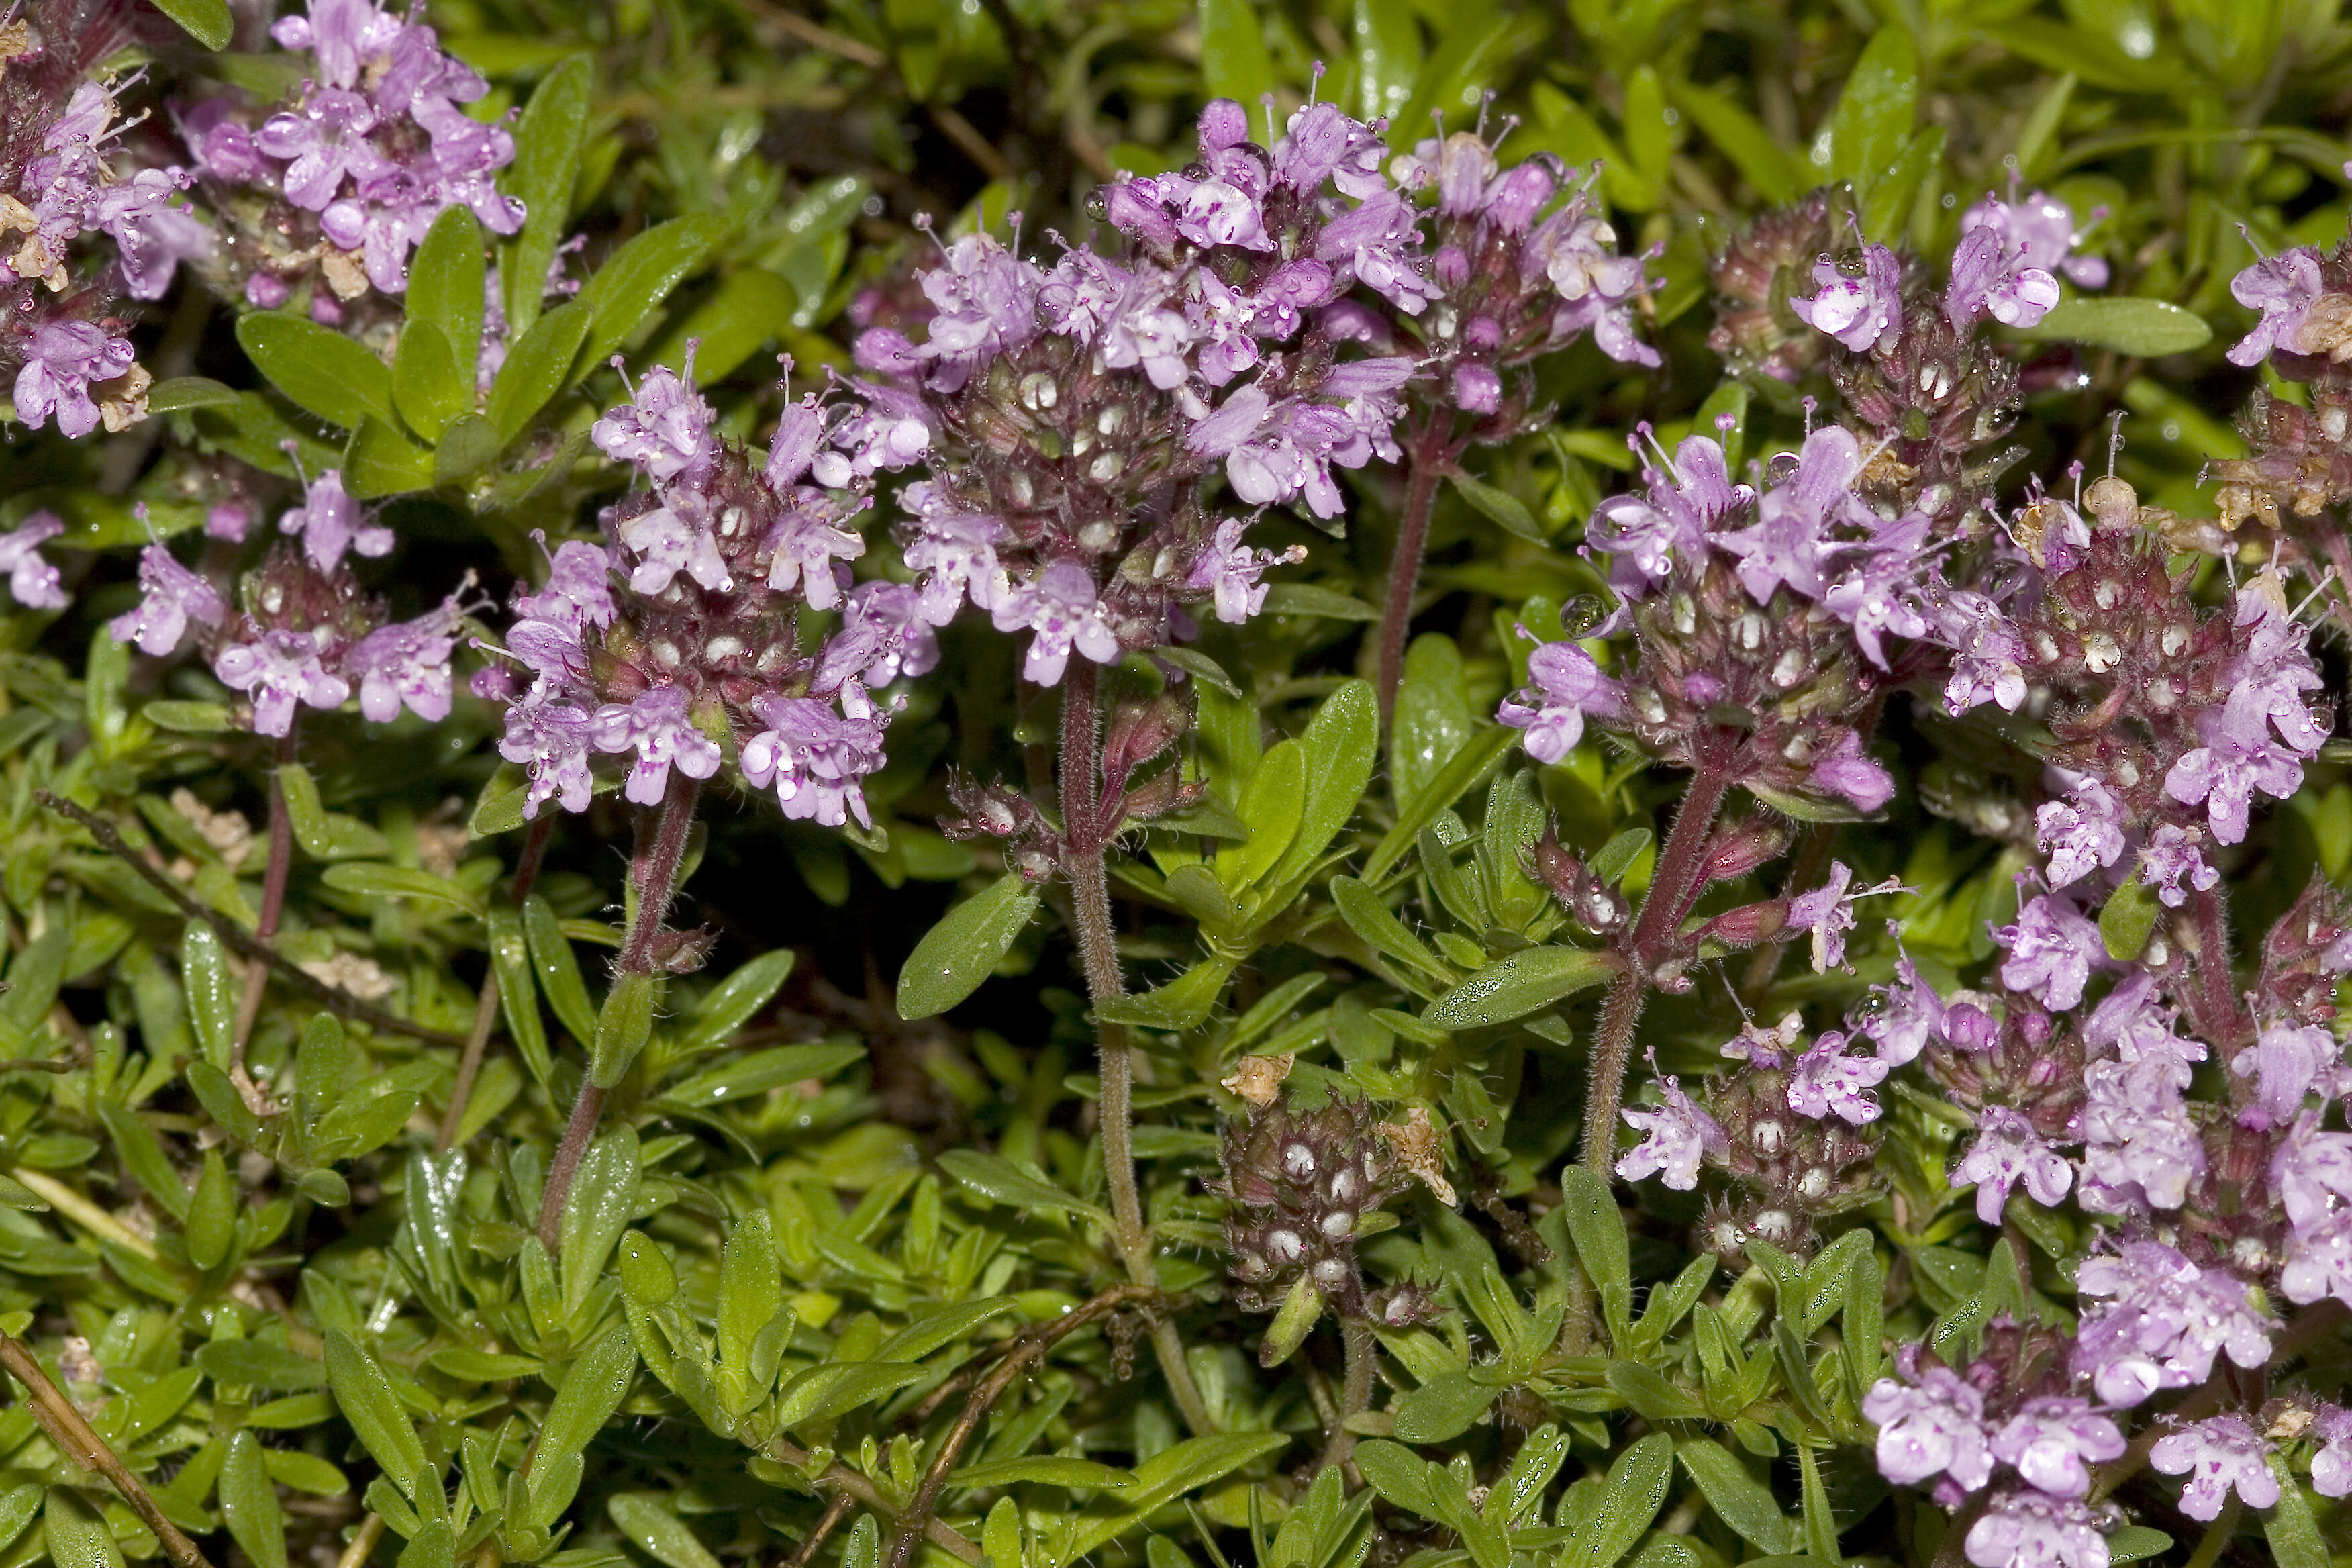 Image of thyme